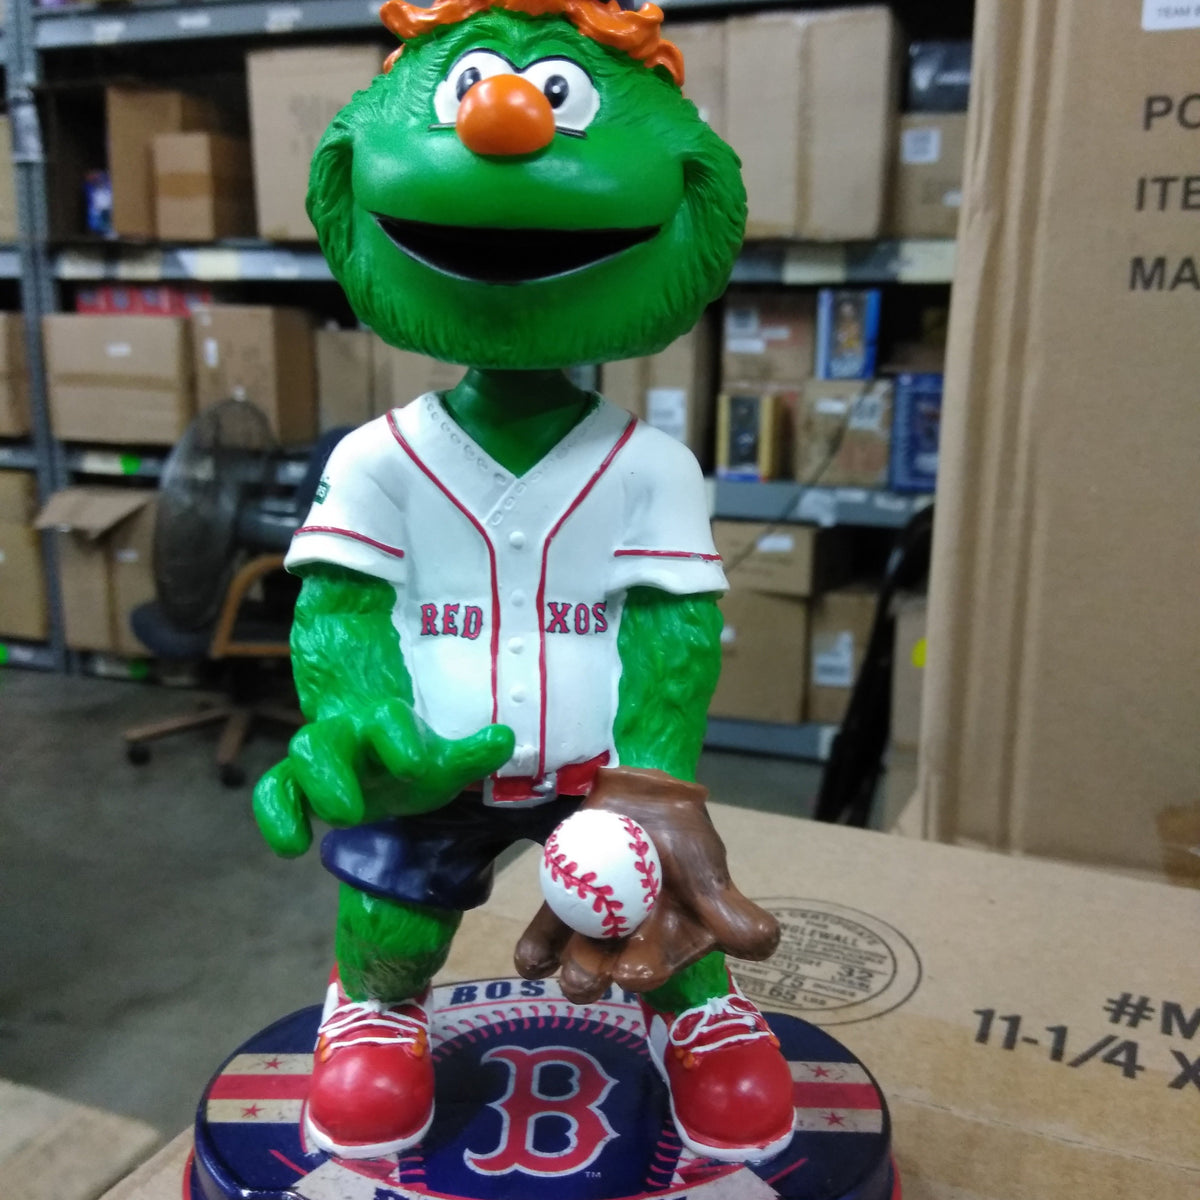 Boston Red Sox fans need this Martinez and Wally bobblehead